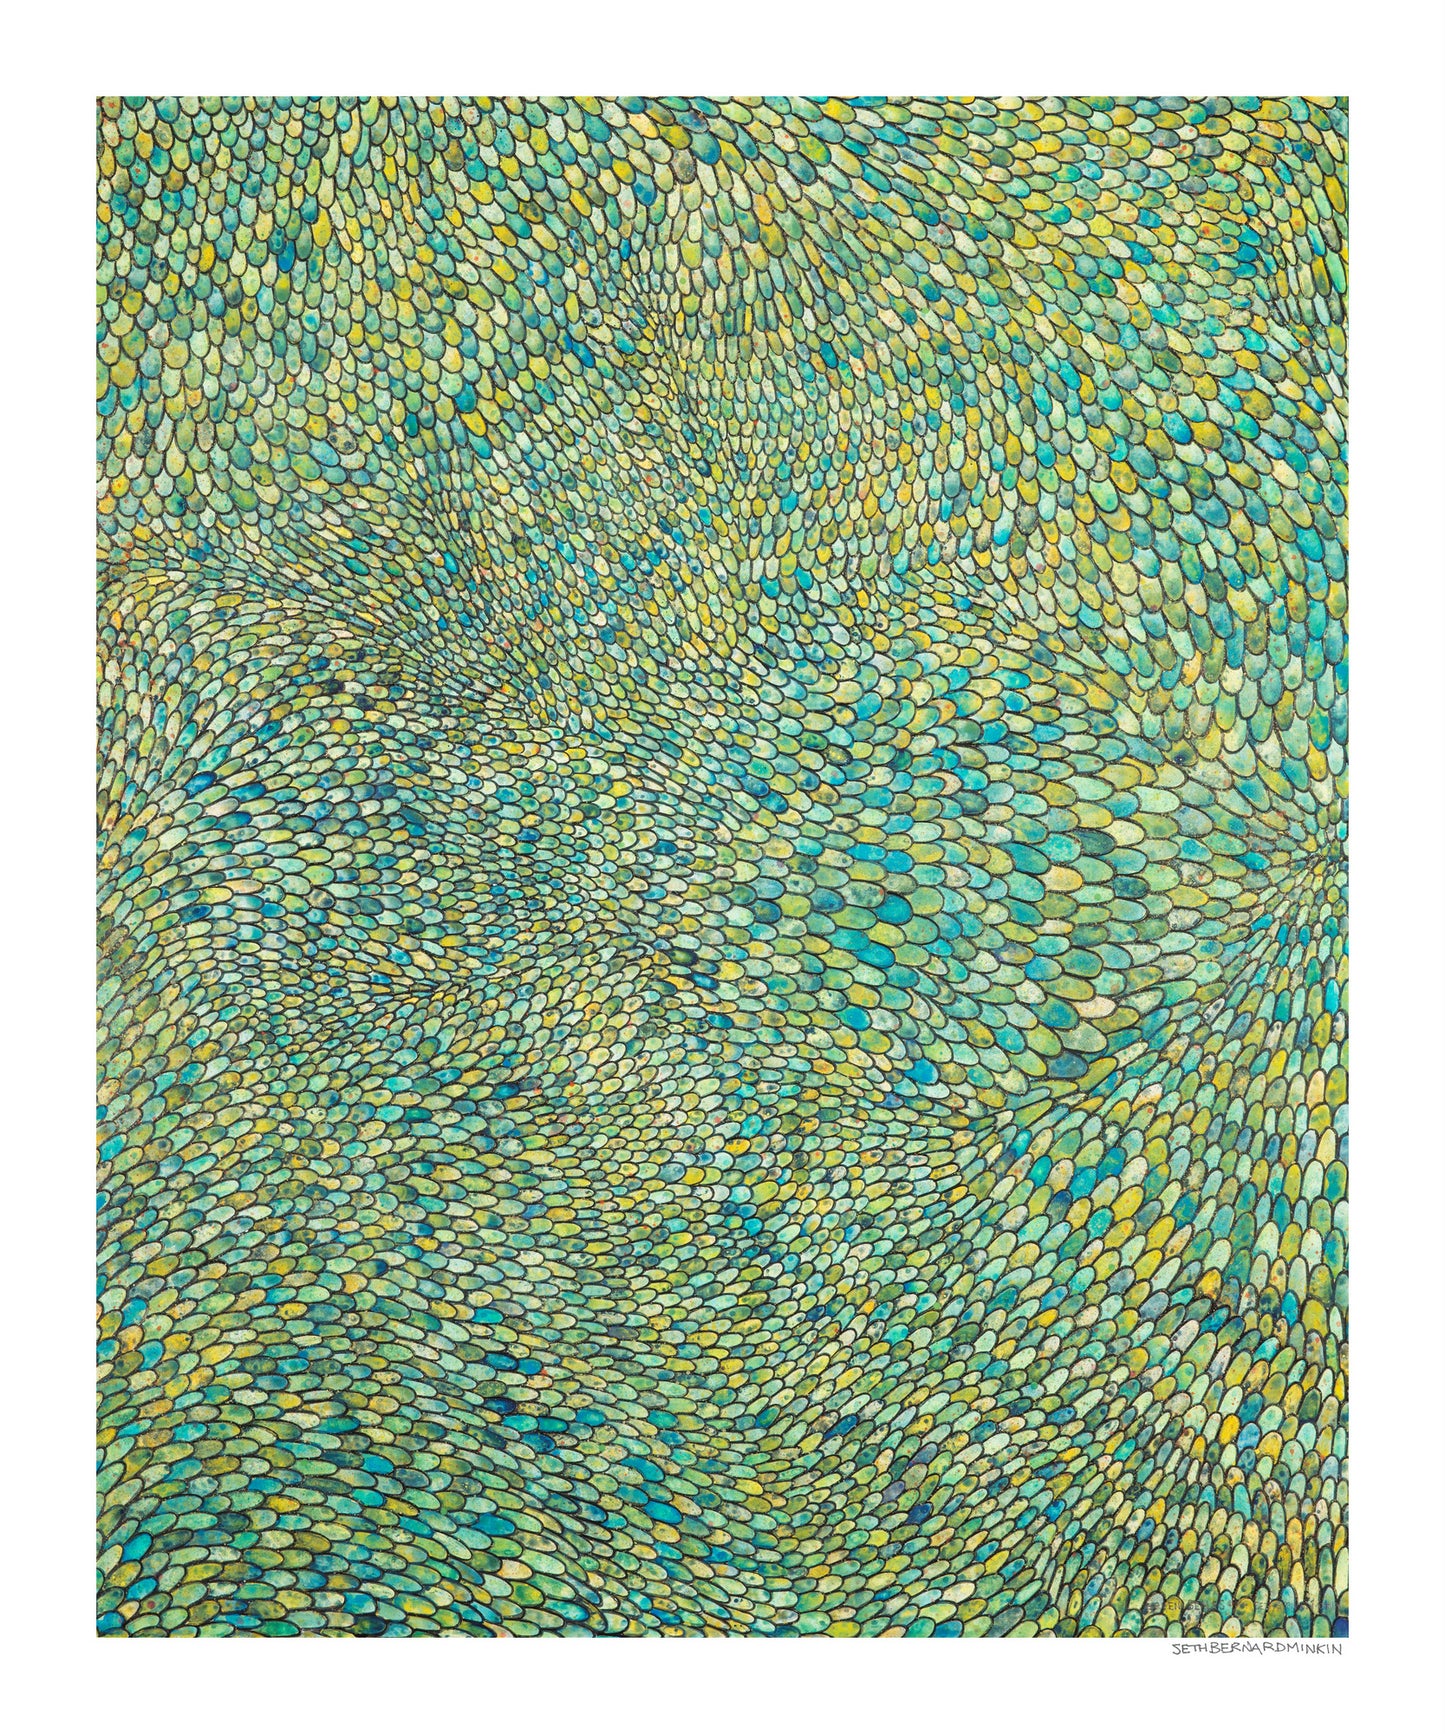 [green scales diptych] [limited edition print set | printed separately] - Seth B. Minkin